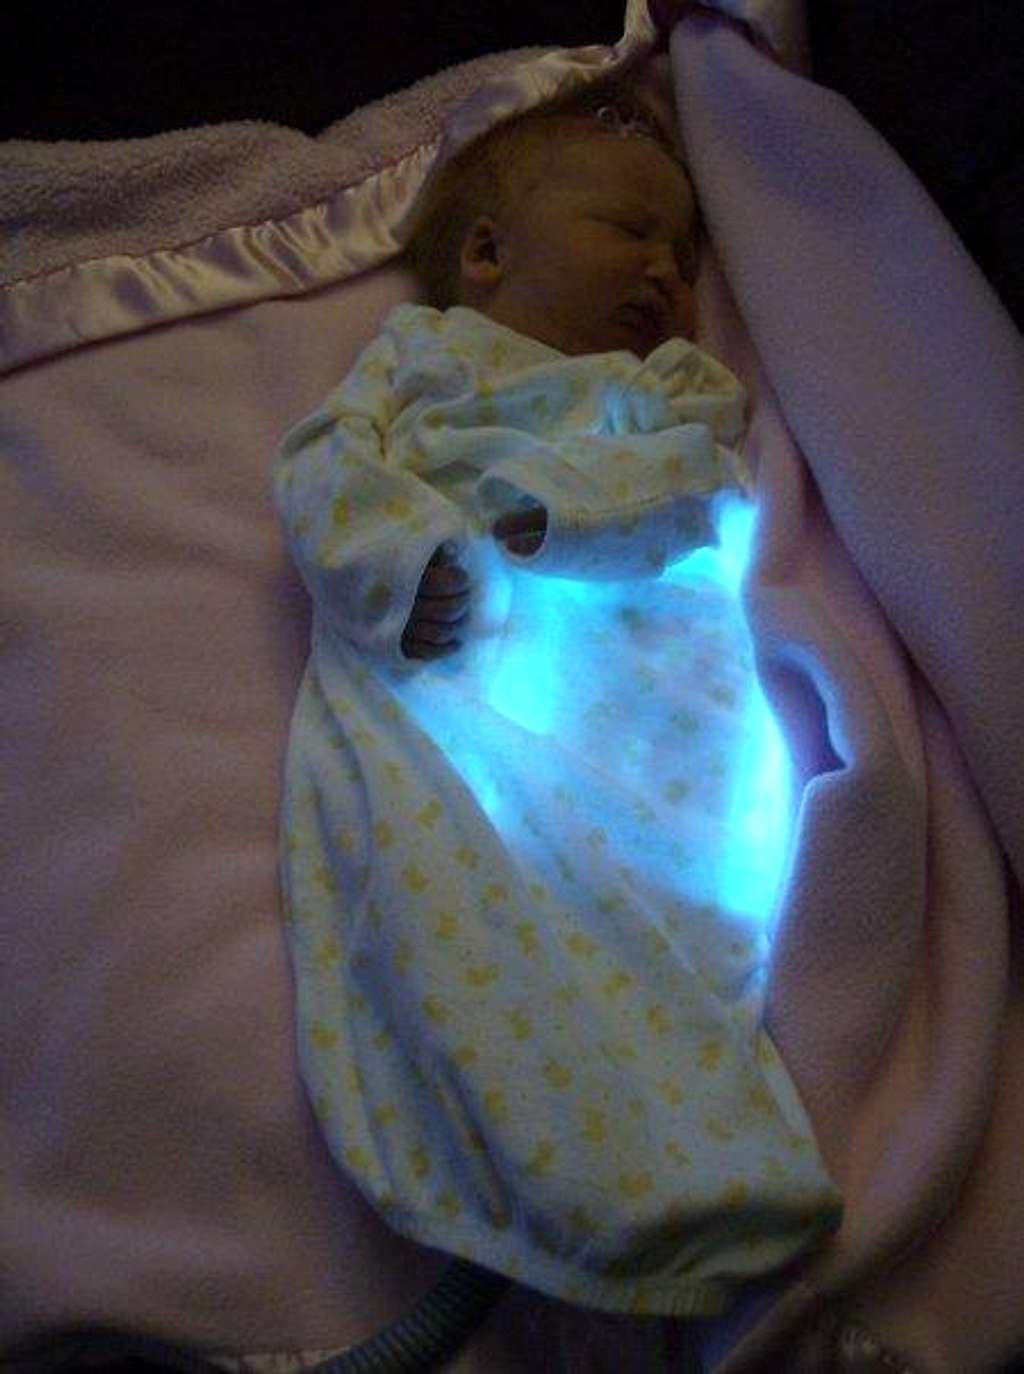 Jaundice, or a way to stay connected to the mothership?